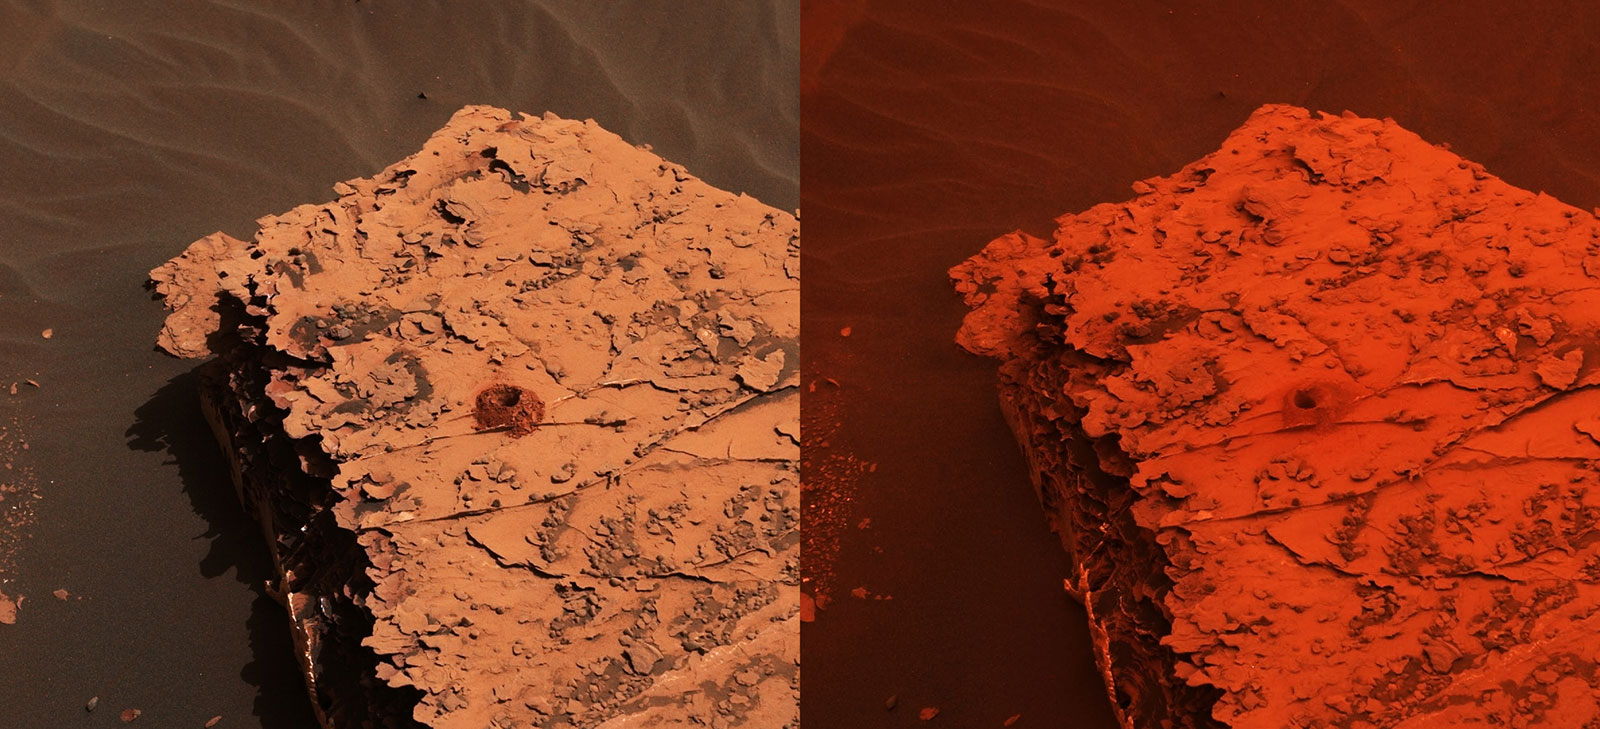 Two images from the Mast Camera (Mastcam) on NASA's Curiosity rover depicting the change in the color of light illuminating the Martian surface since a dust storm engulfed Gale Crater.